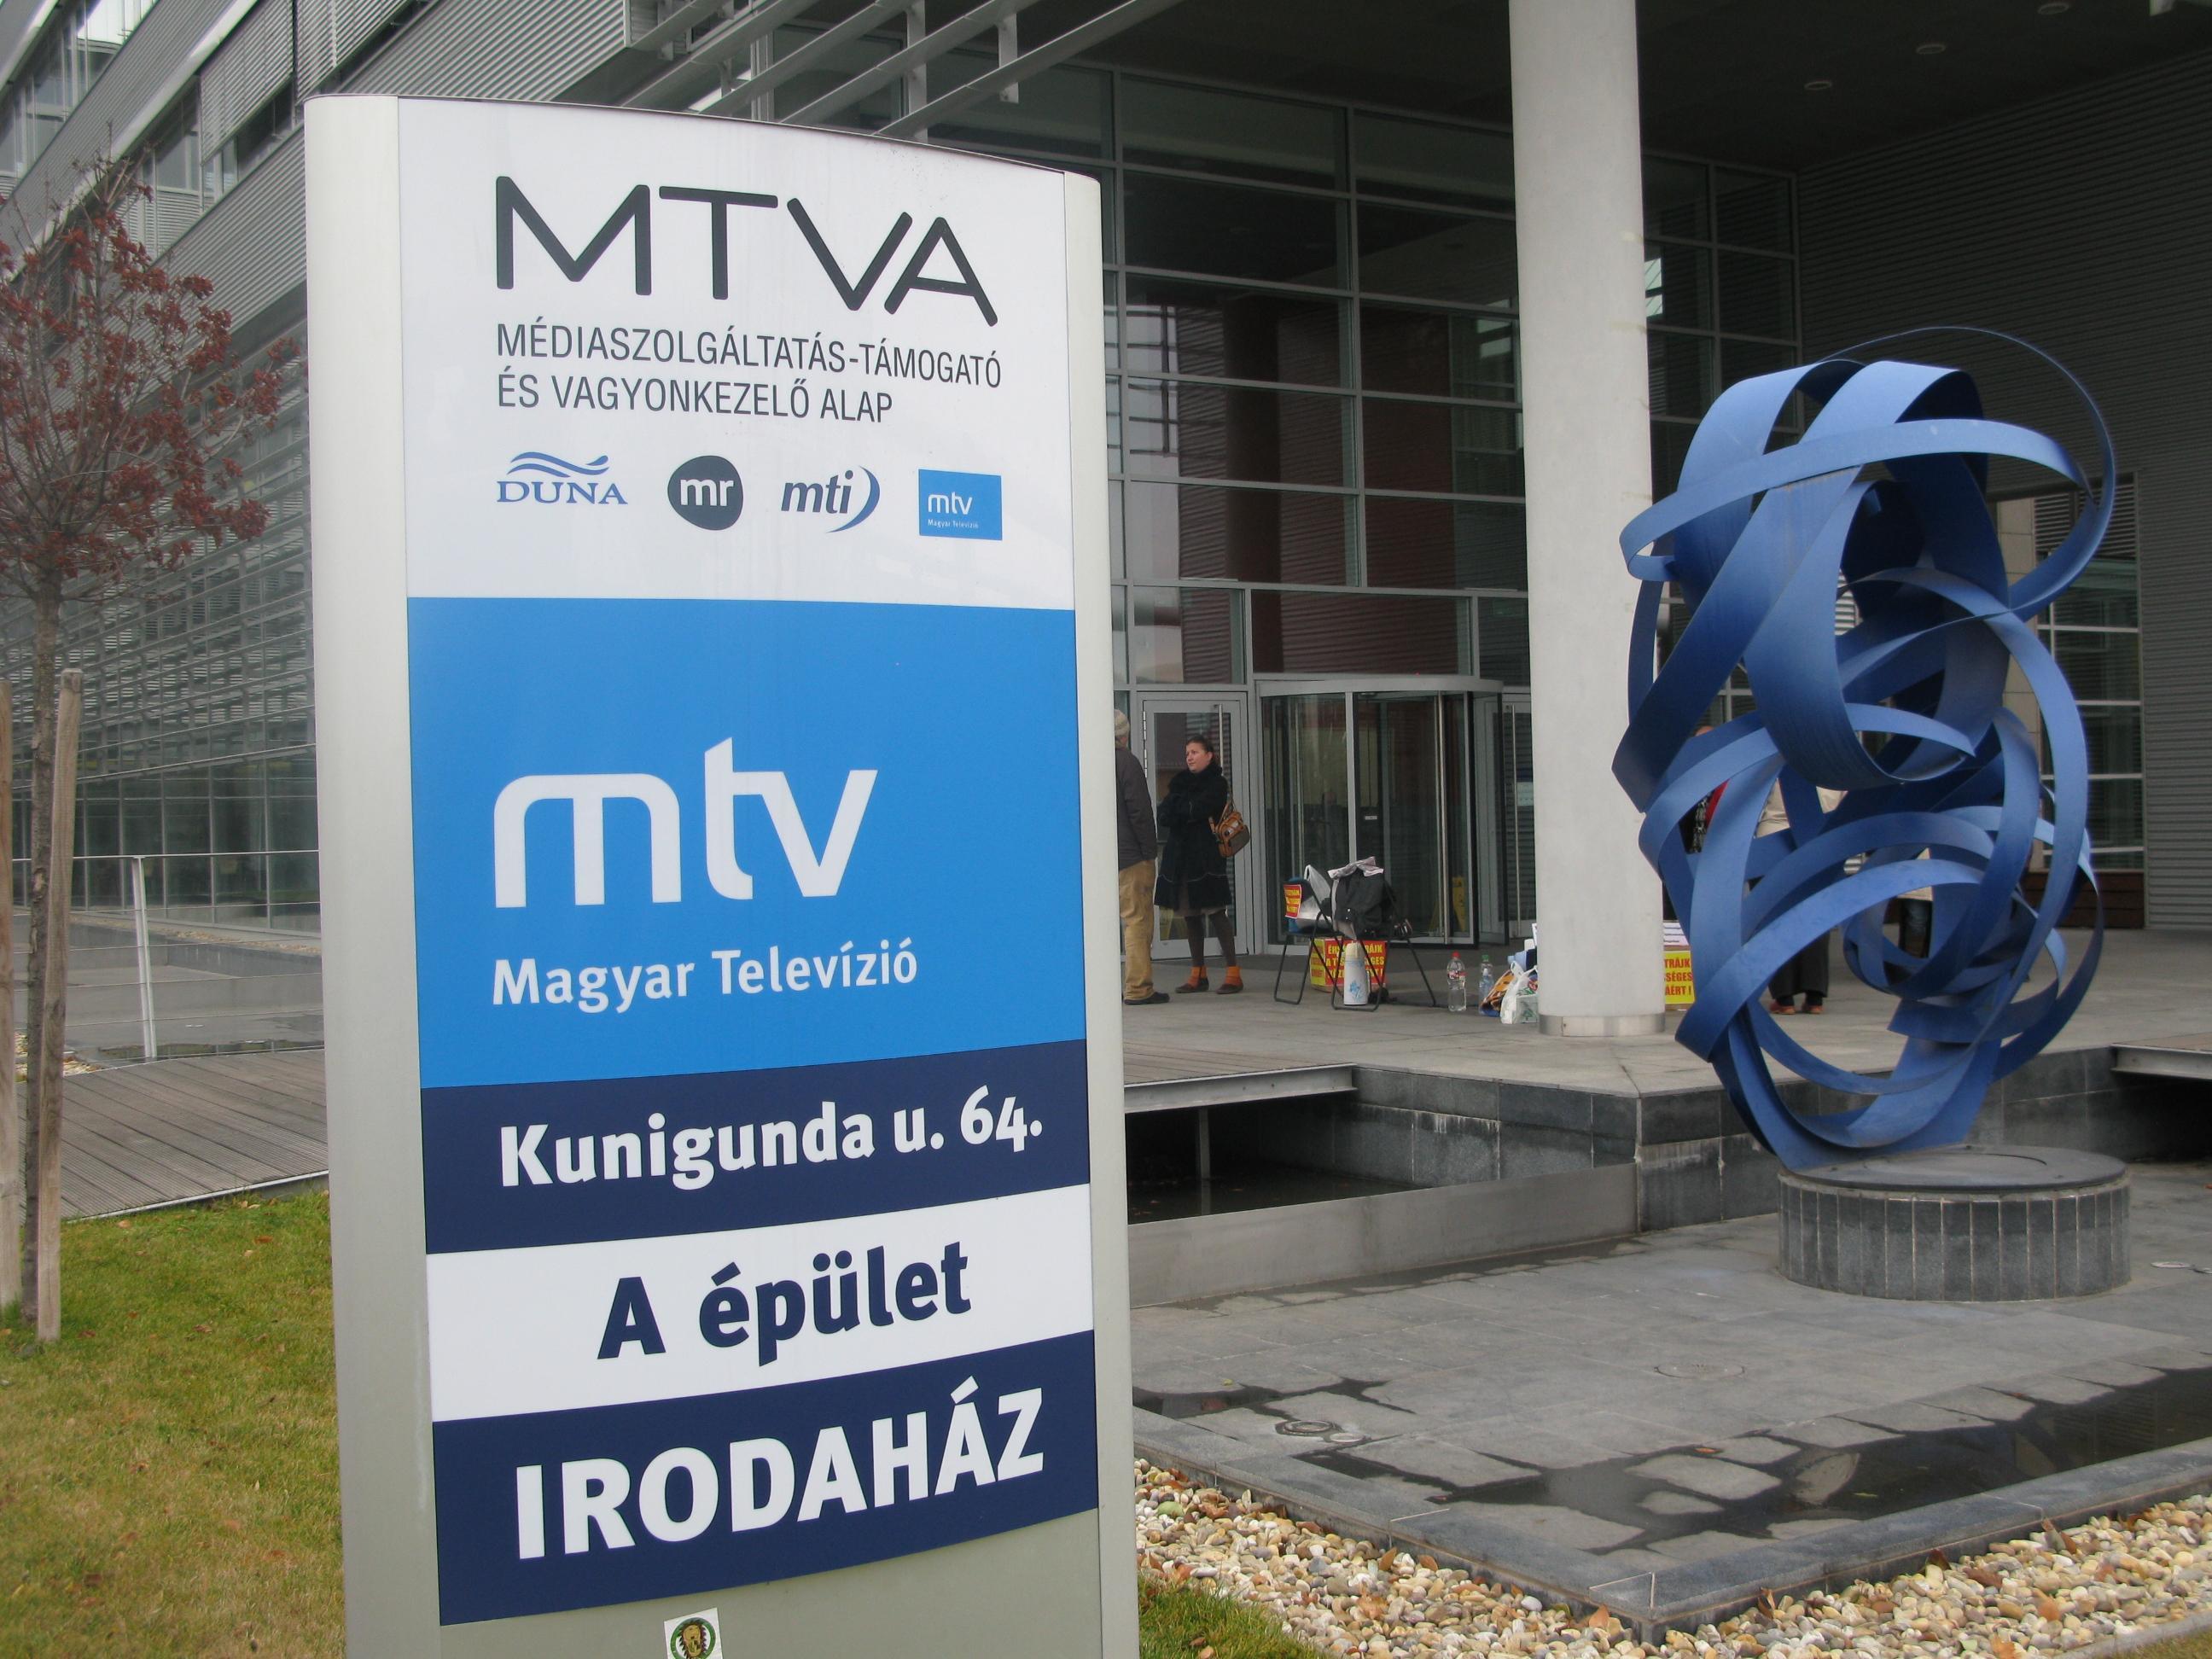 MTVA Reports Assault On Newsreader To Hungarian Police